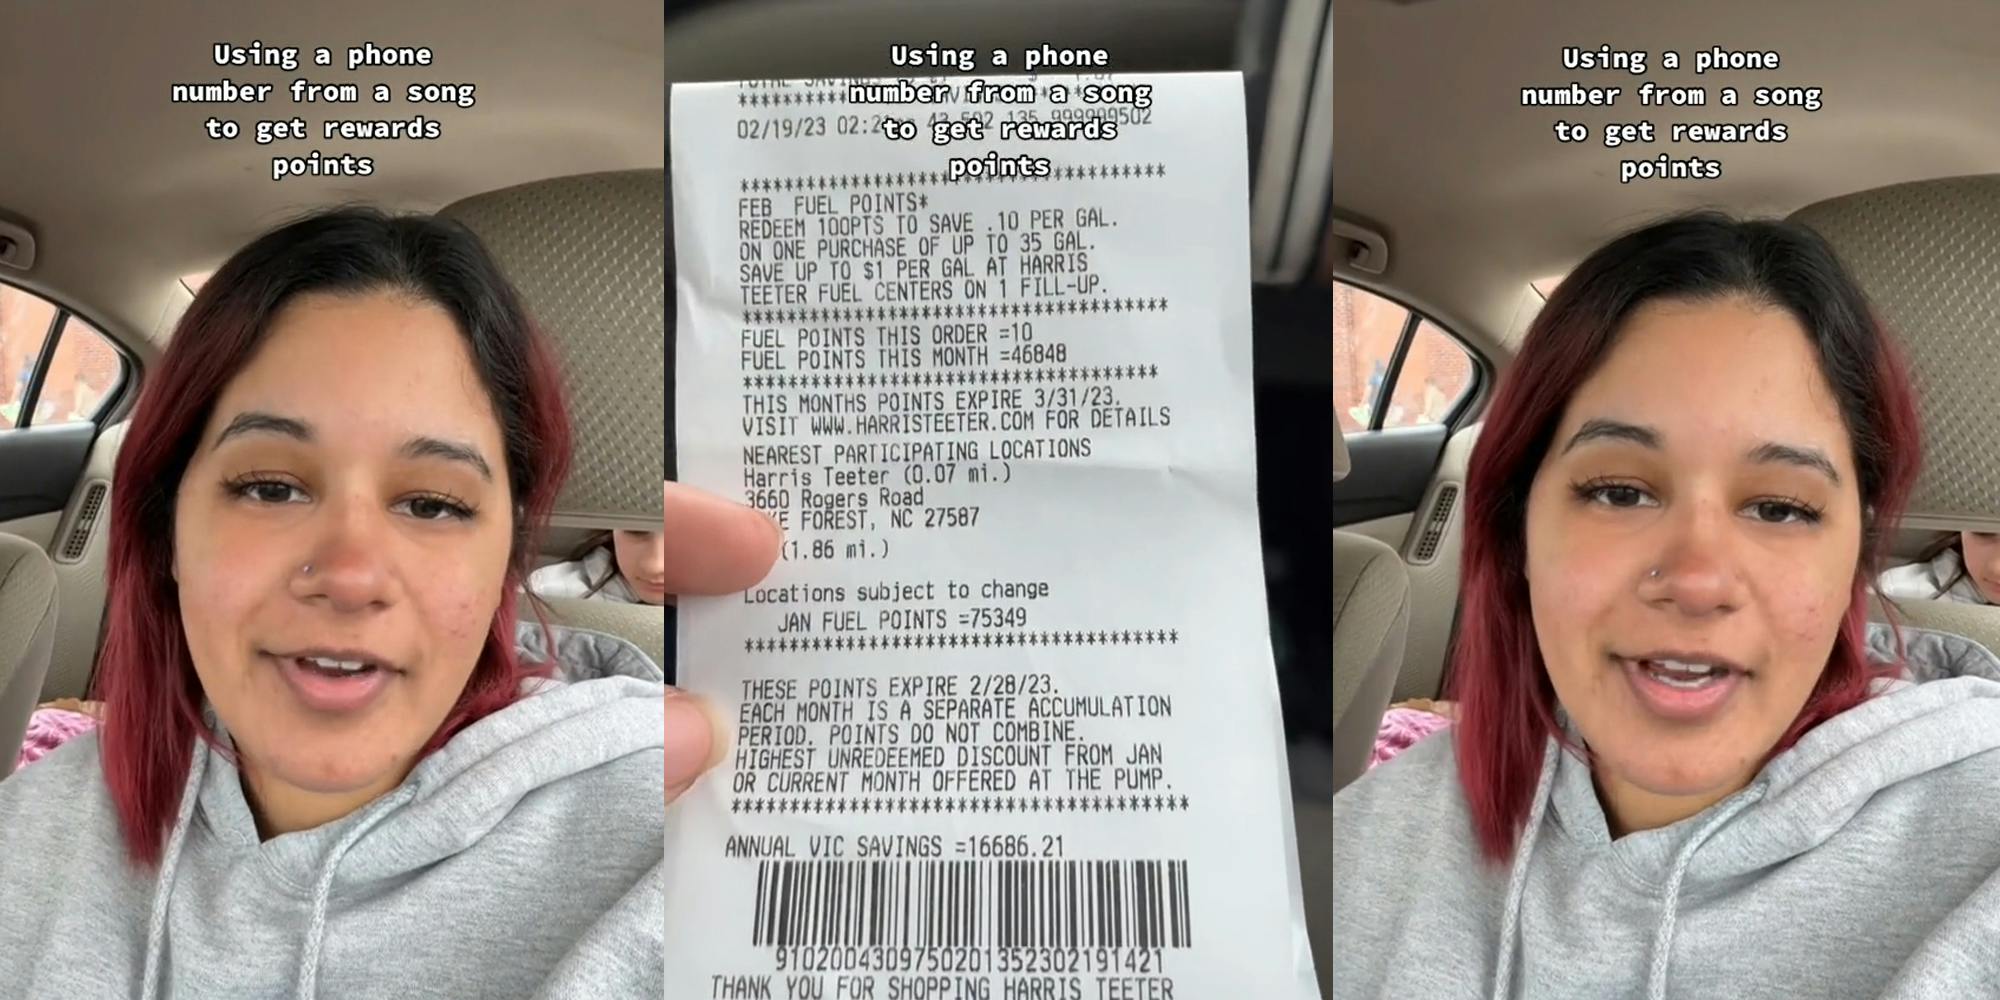 woman speaking in car with caption " Using a phone number from a song to get rewards points" (l) woman holding receipt in car with caption " Using a phone number from a song to get rewards points" (c) woman speaking in car with caption " Using a phone number from a song to get rewards points" (r)